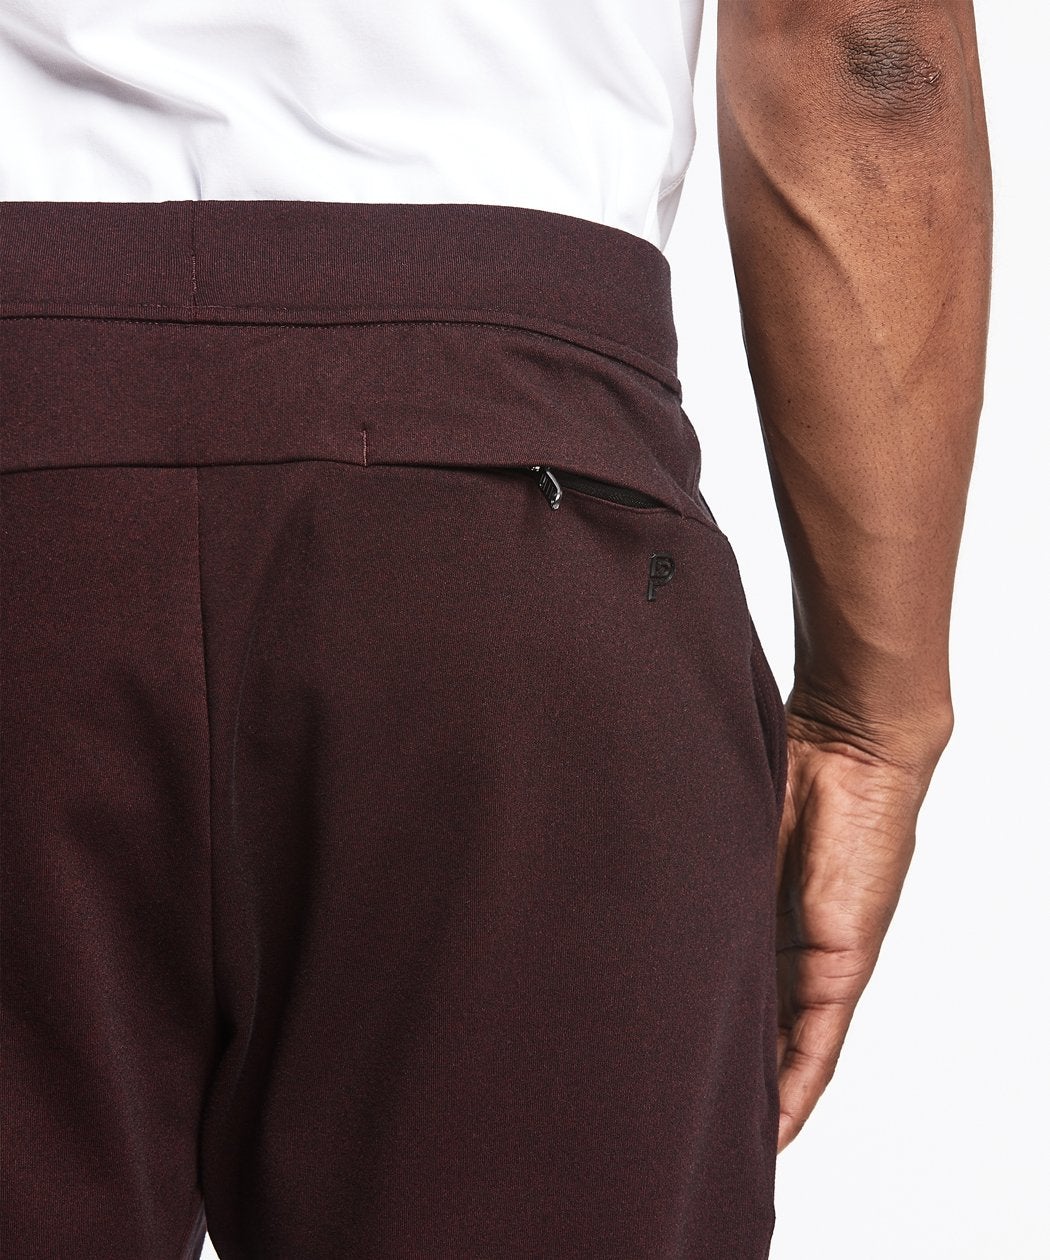 All Day Every Day Jogger | Men's Heather Burgundy